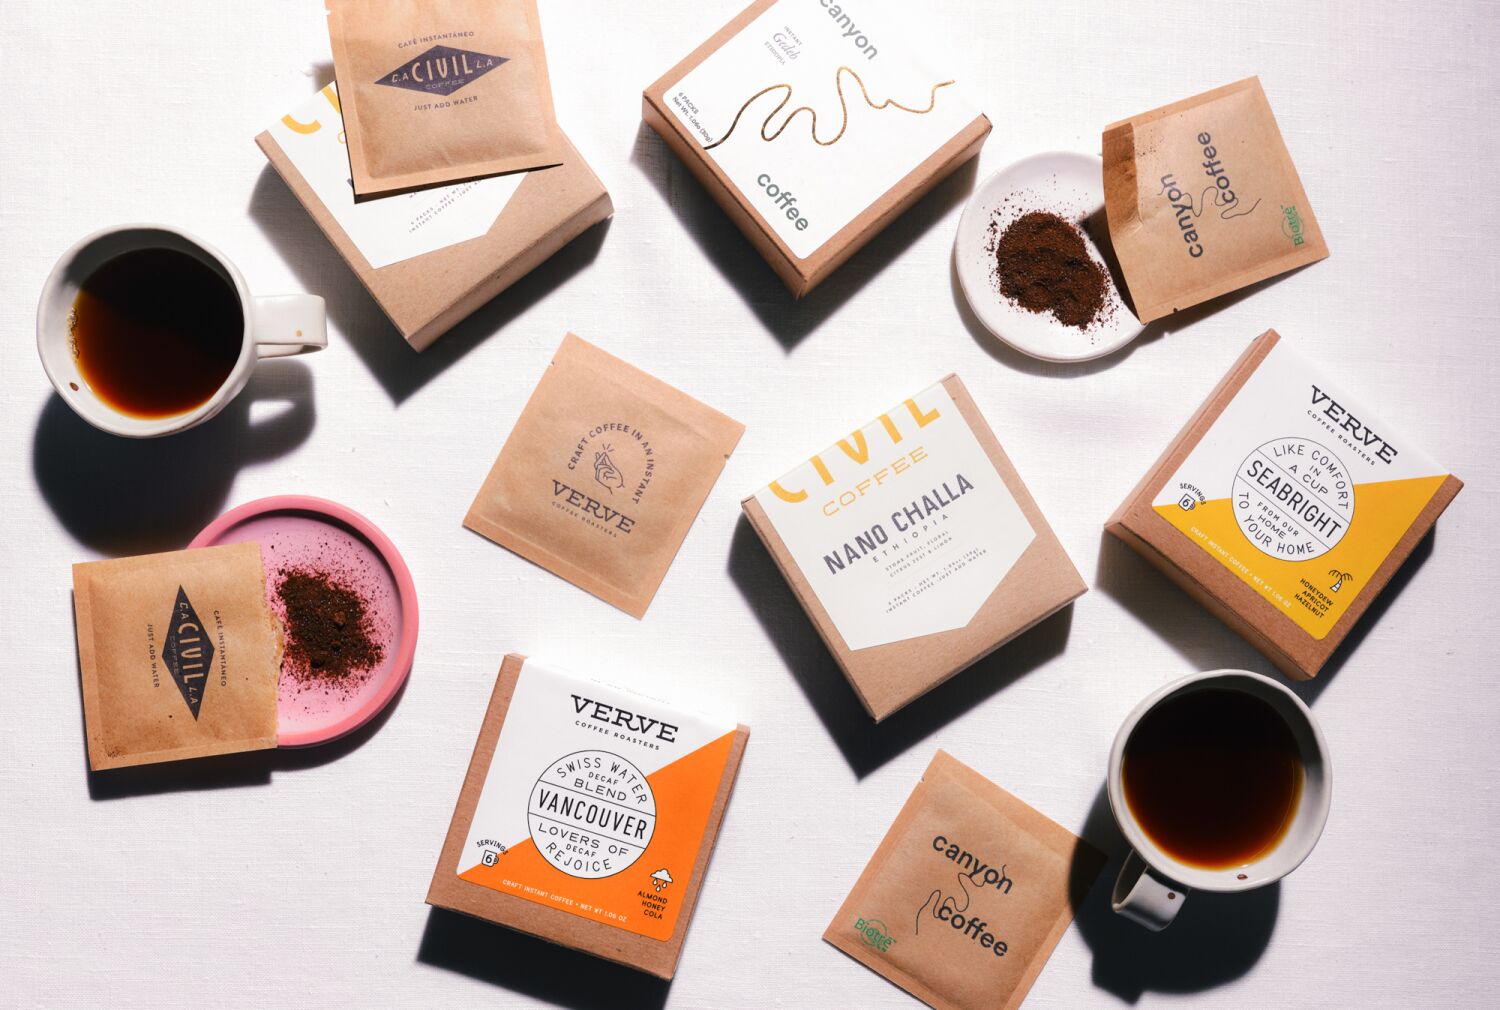 Instant coffee that tastes as good as a fresh brew? These L.A. brands have the best